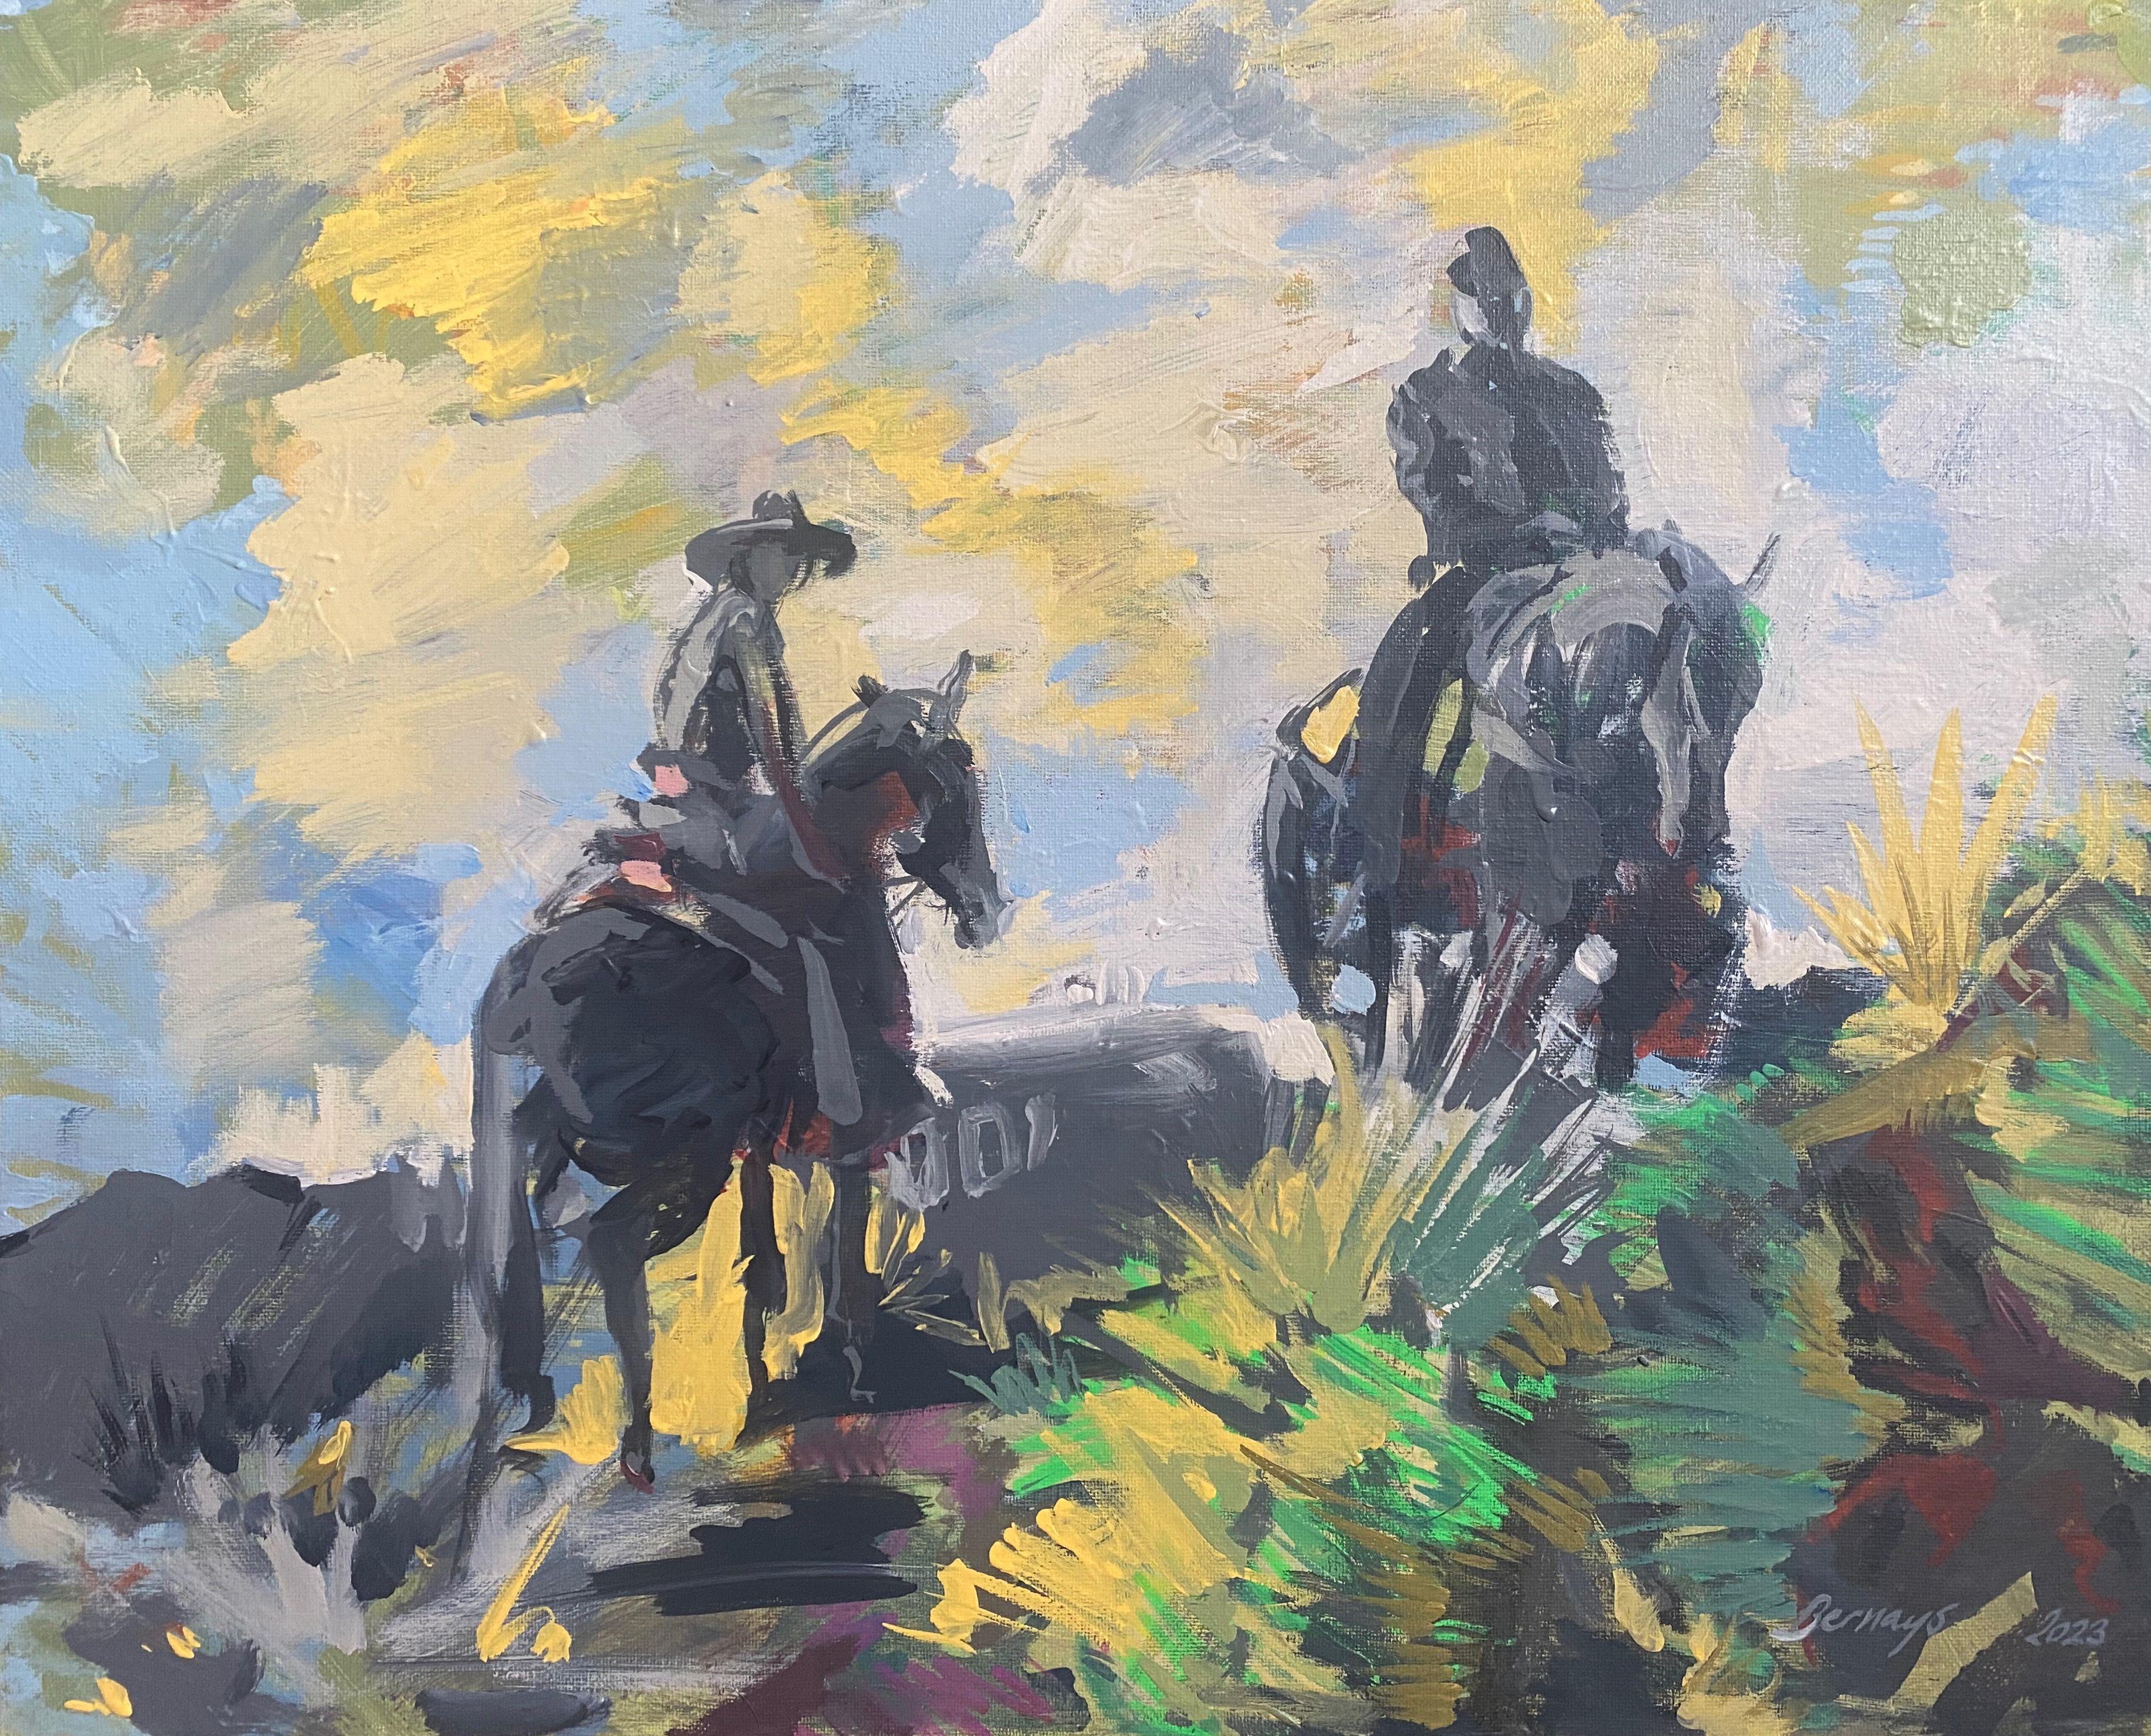 I like to paint to find the meaning. What makes happiness? What fills me with joy?    My husband and I have managed this ranch under the Hollywood sign for over 20 years. Some of my happiest moments are riding in Griffith Park or the streets of